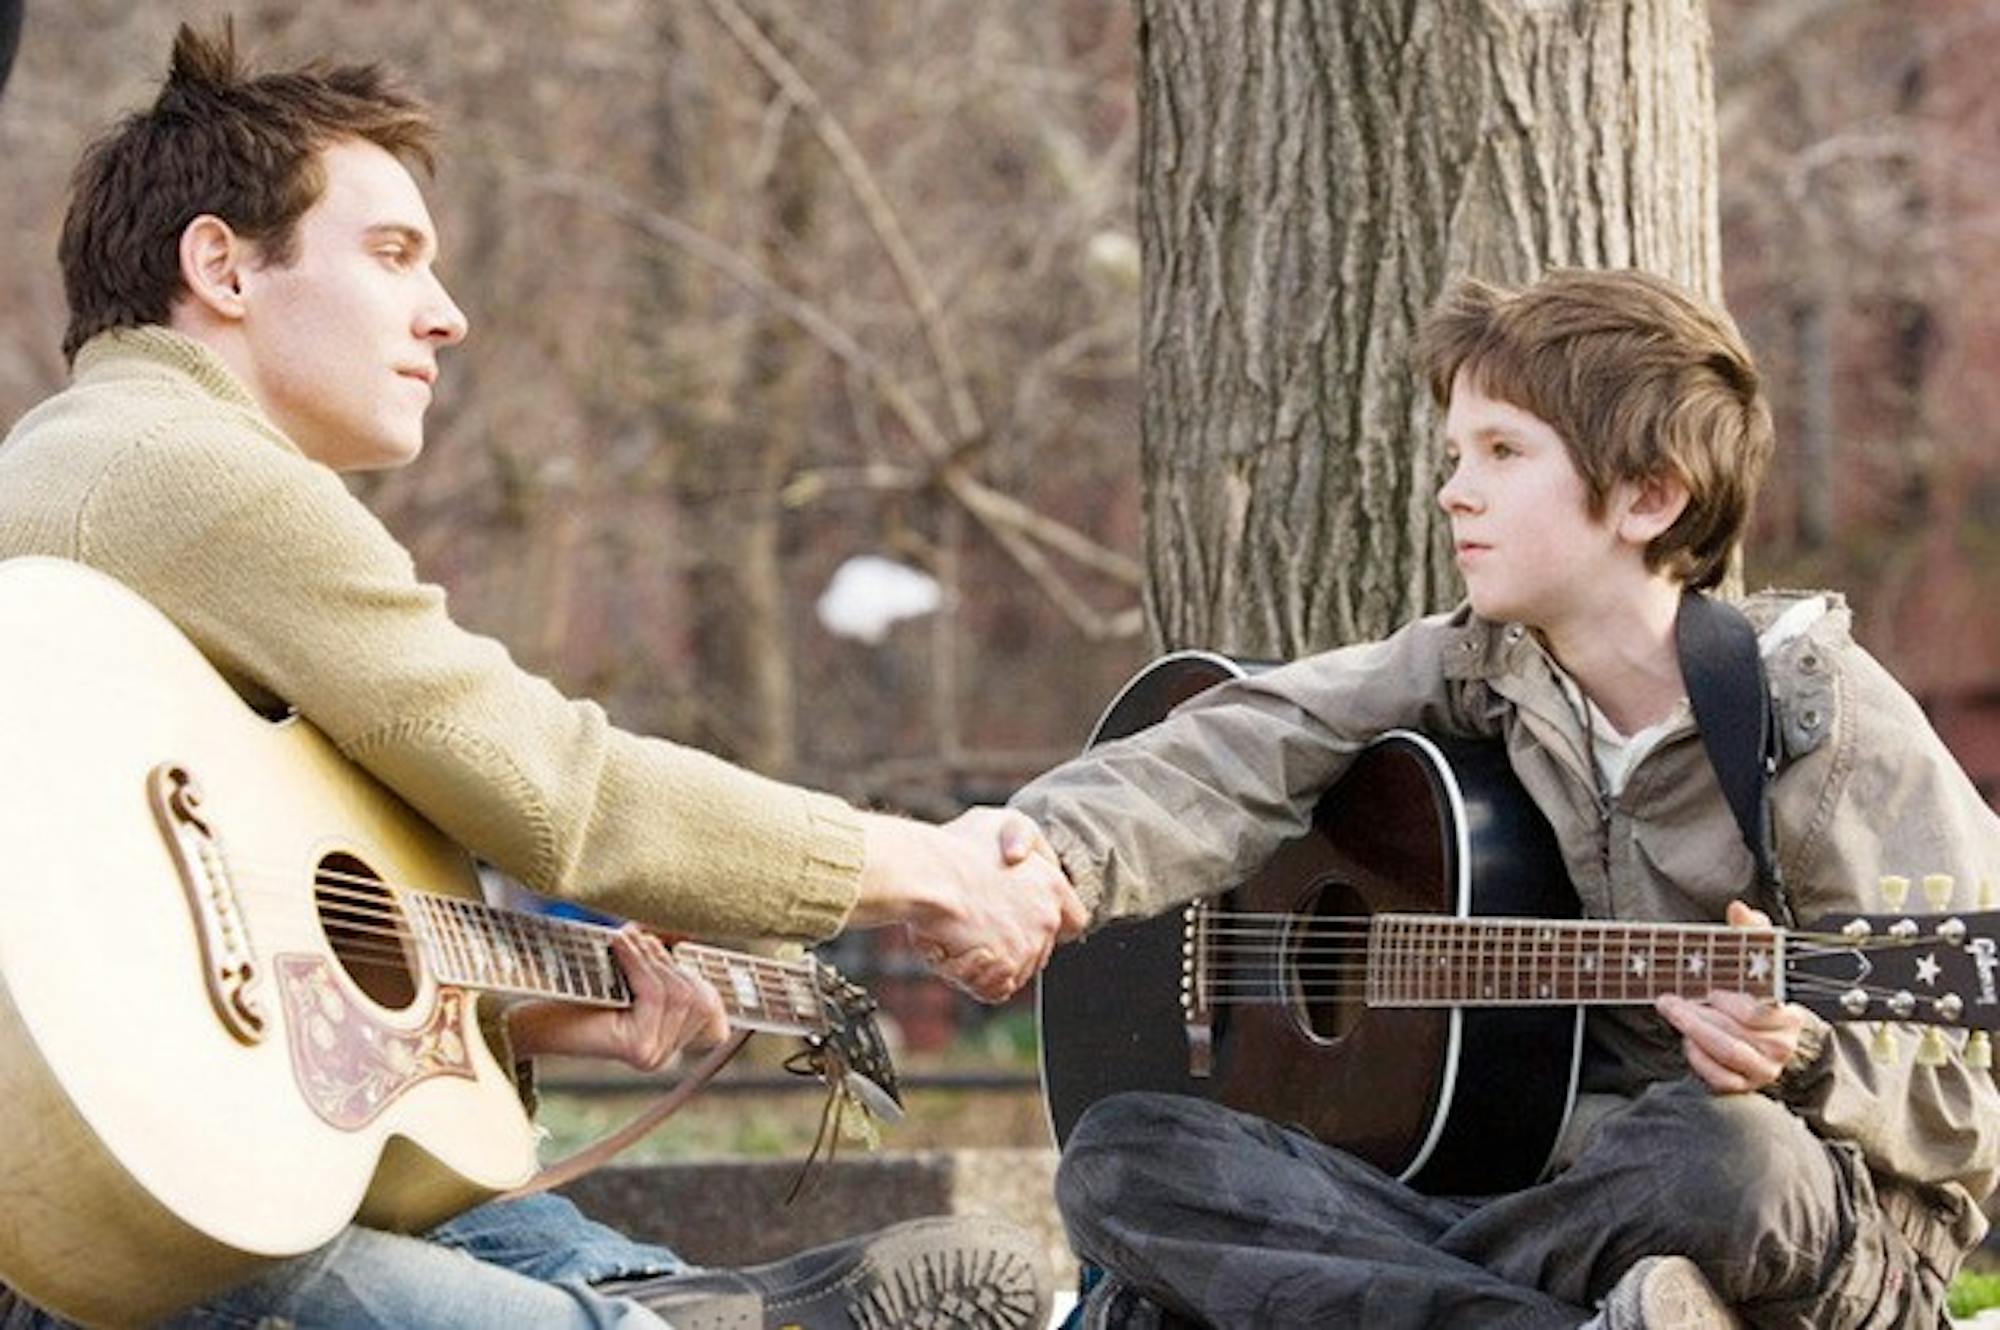 JONATHAN RHYS MEYERS stars as Louis Connelly and FREDDIE HIGHMORE stars as August Rush in Warner Bros. Pictures